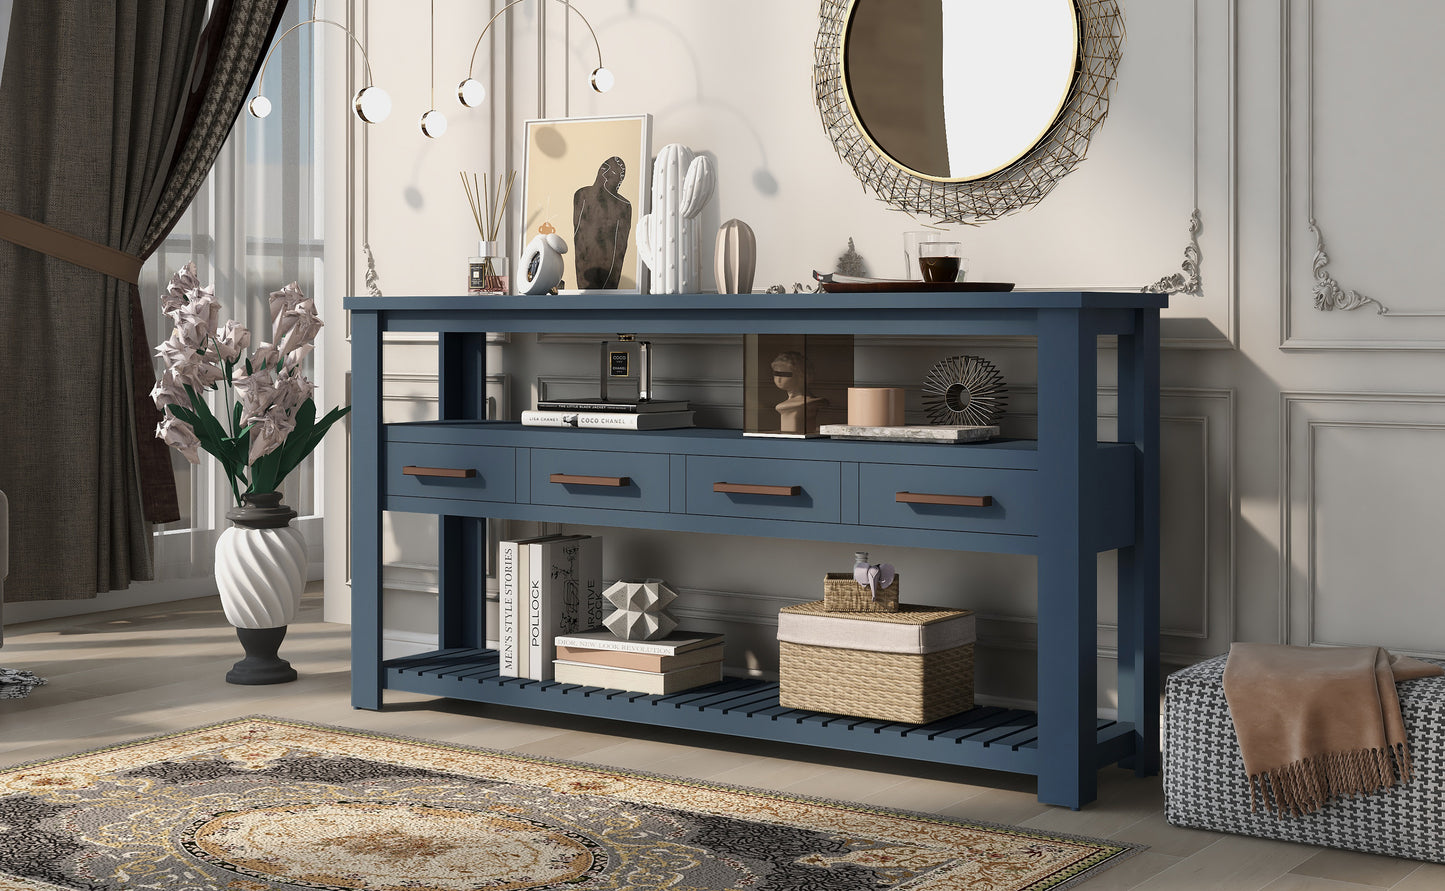 U_STYLE 62.2'' Modern Console Table Sofa Table for Living Room with 4 Drawers and 2 Shelves